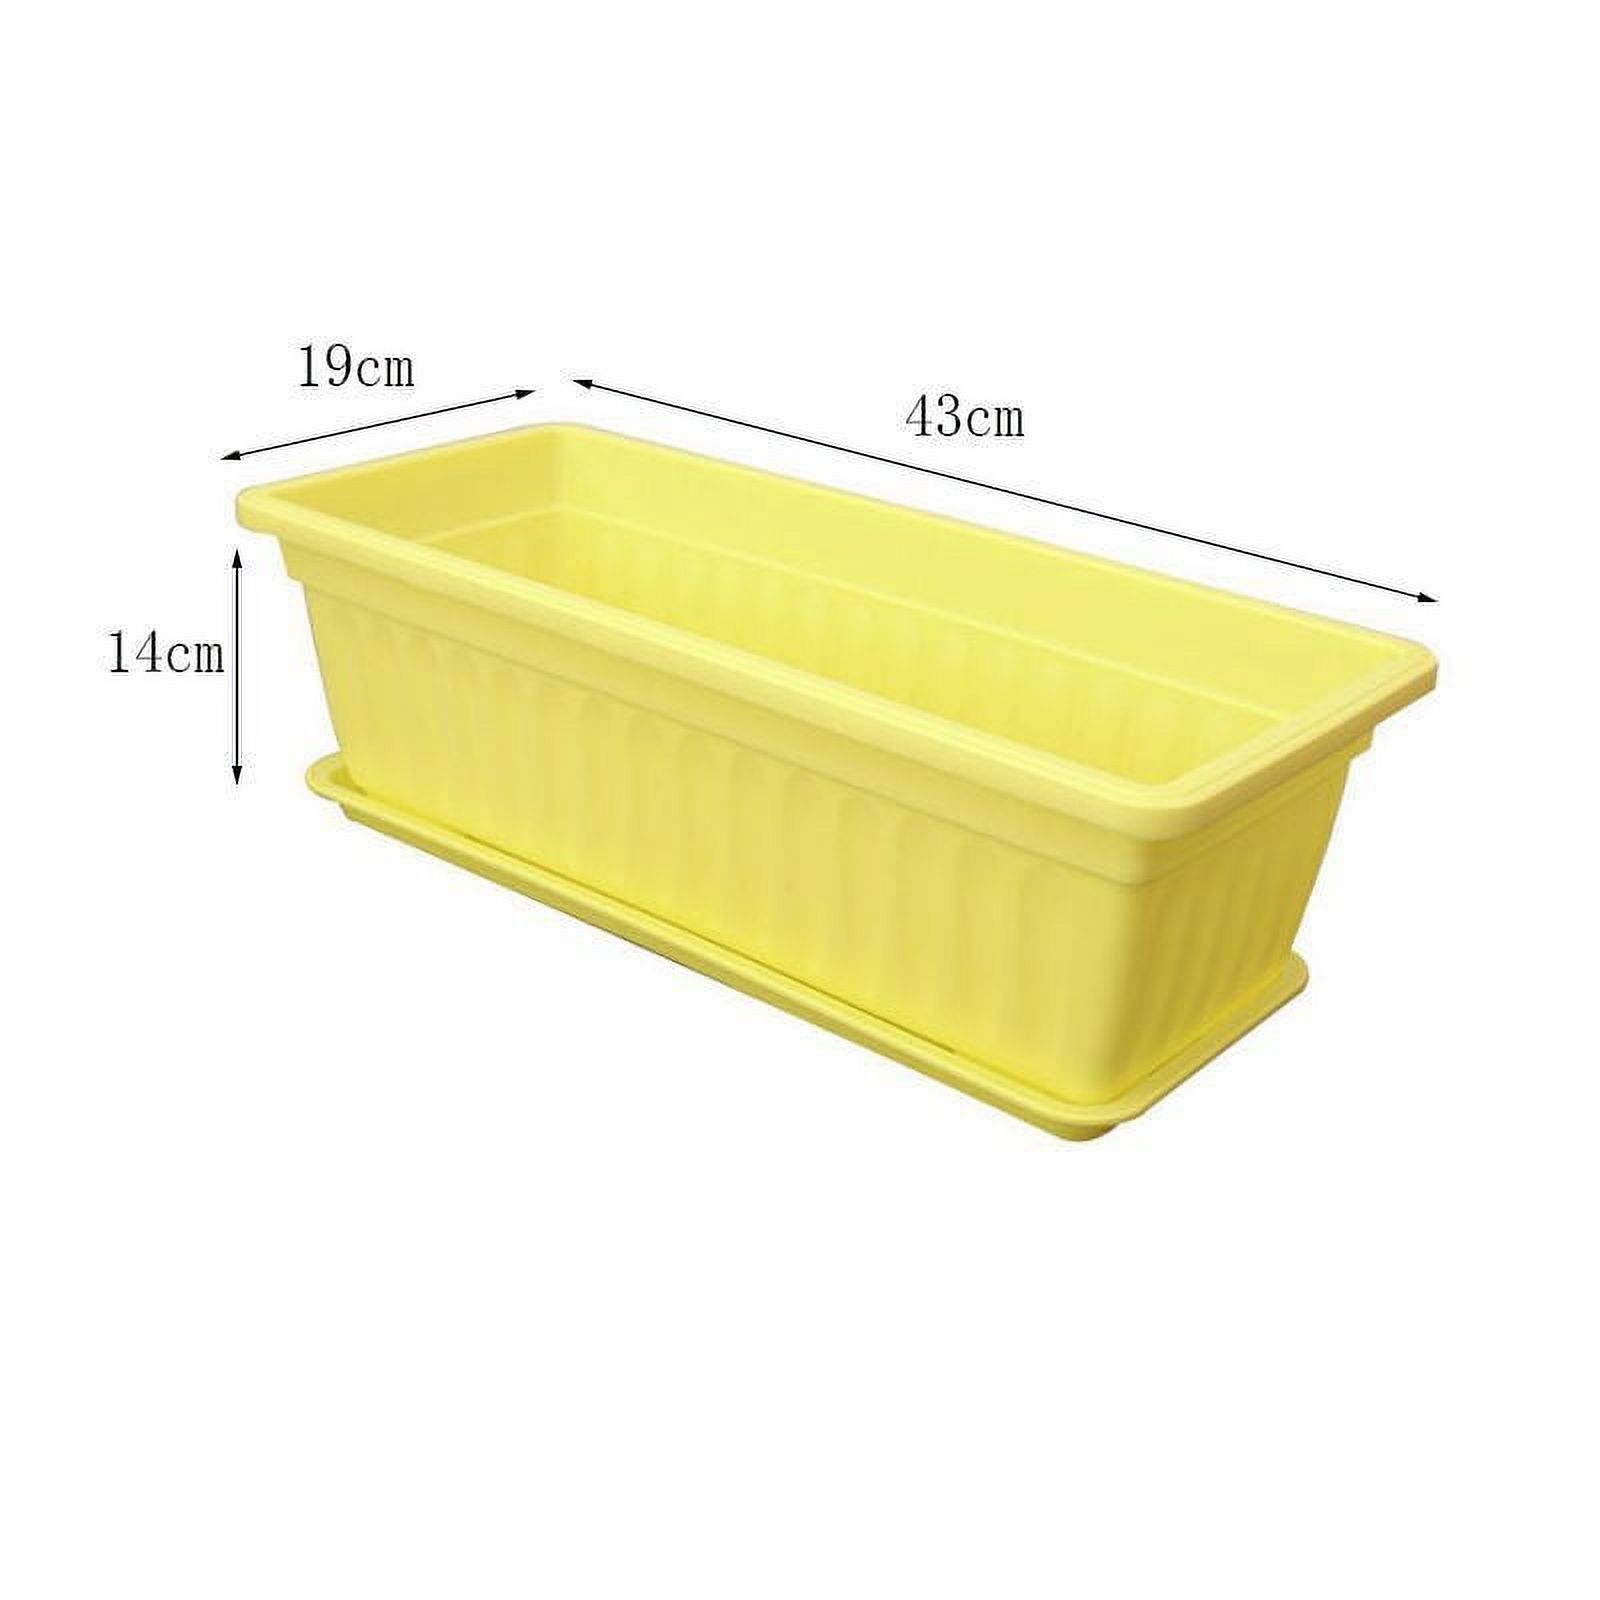 17 Inch Rectangular Plastic Thicken Planters with Trays - Window Planter Box for Outdoor and Indoor Herbs, Vegetables, Flowers and Succulent Plants (1 Pack Yellow) - image 1 of 8